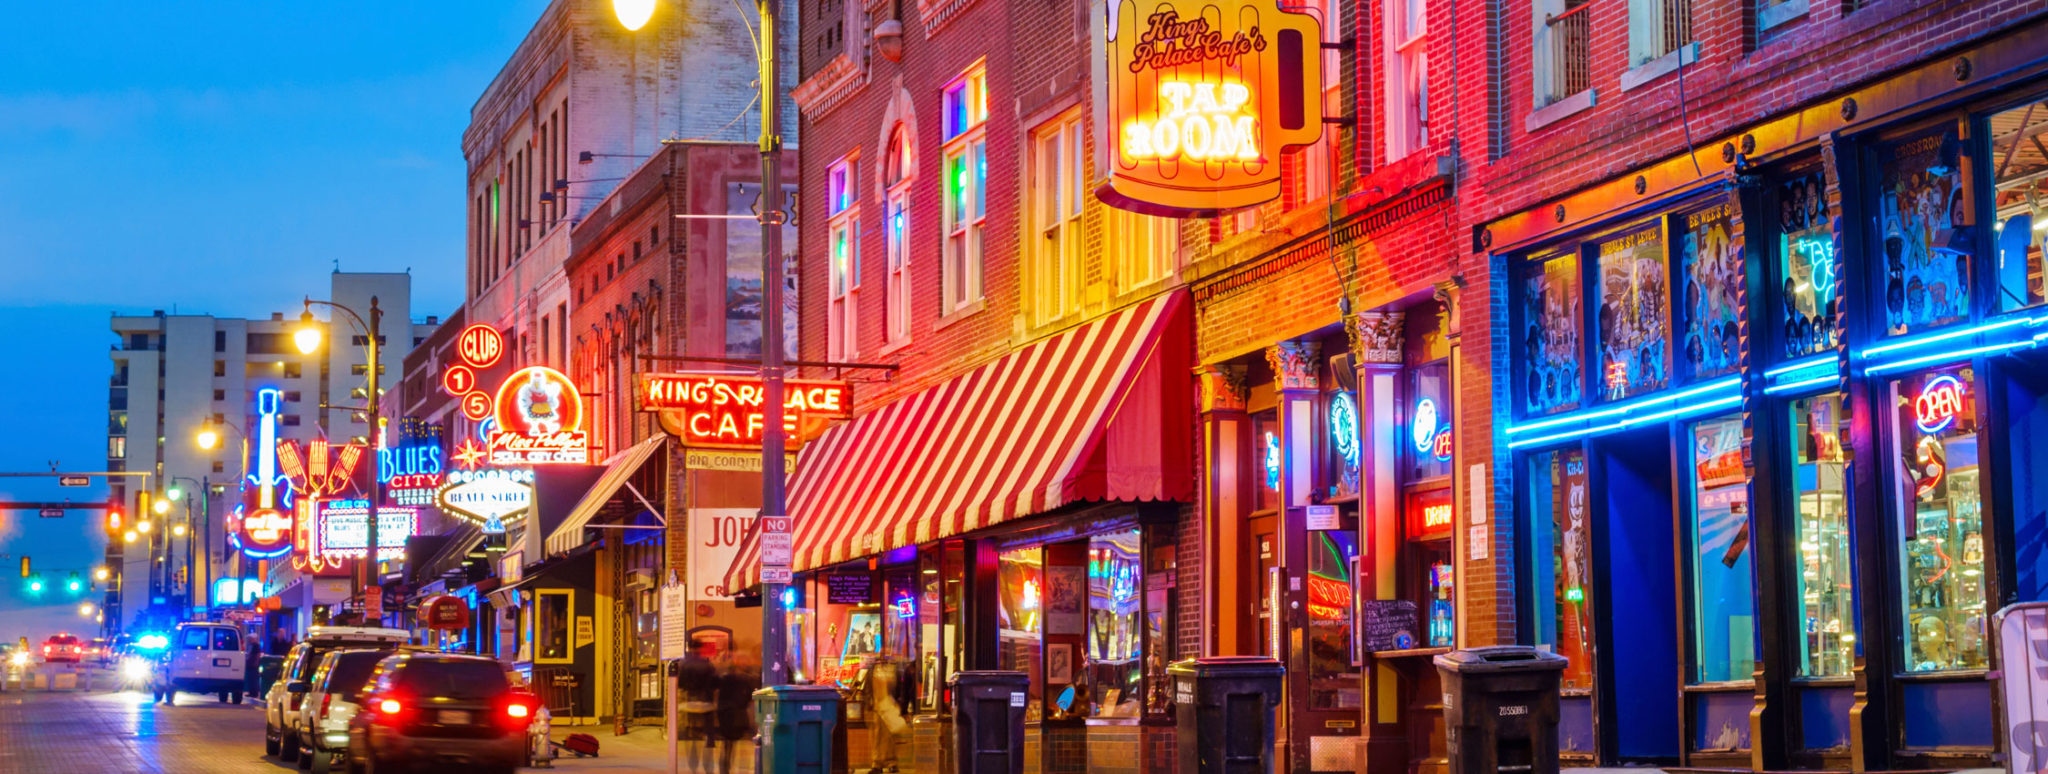 How to Enjoy Memphis on a Budget